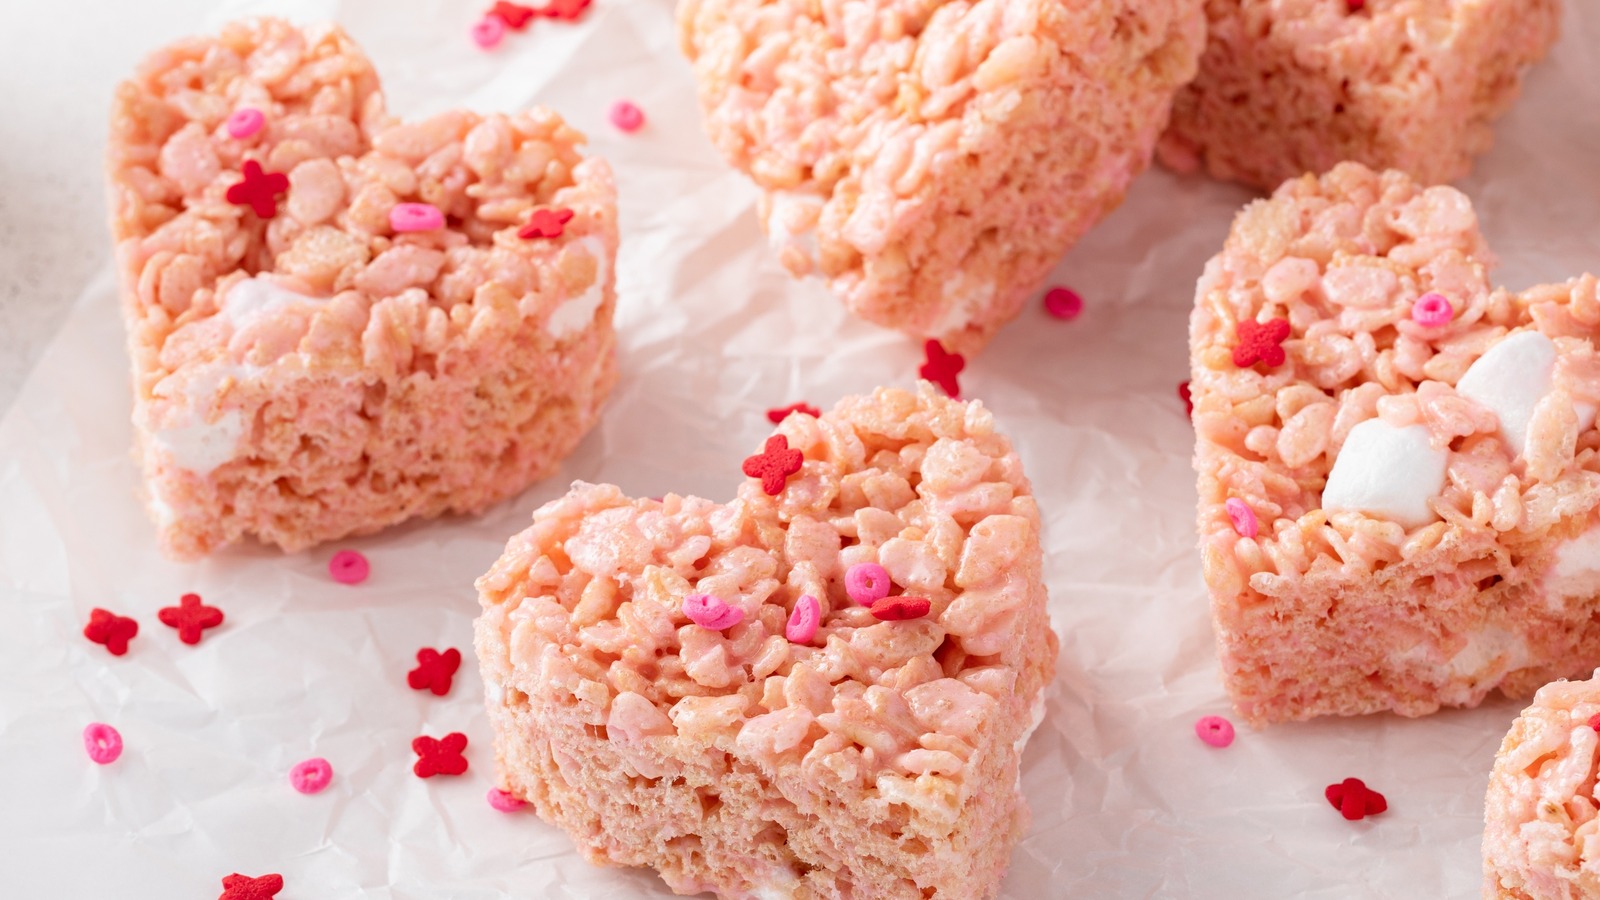 26 Underrated Ingredients You Should Be Adding To Your Rice Krispies Treats - Daily Meal